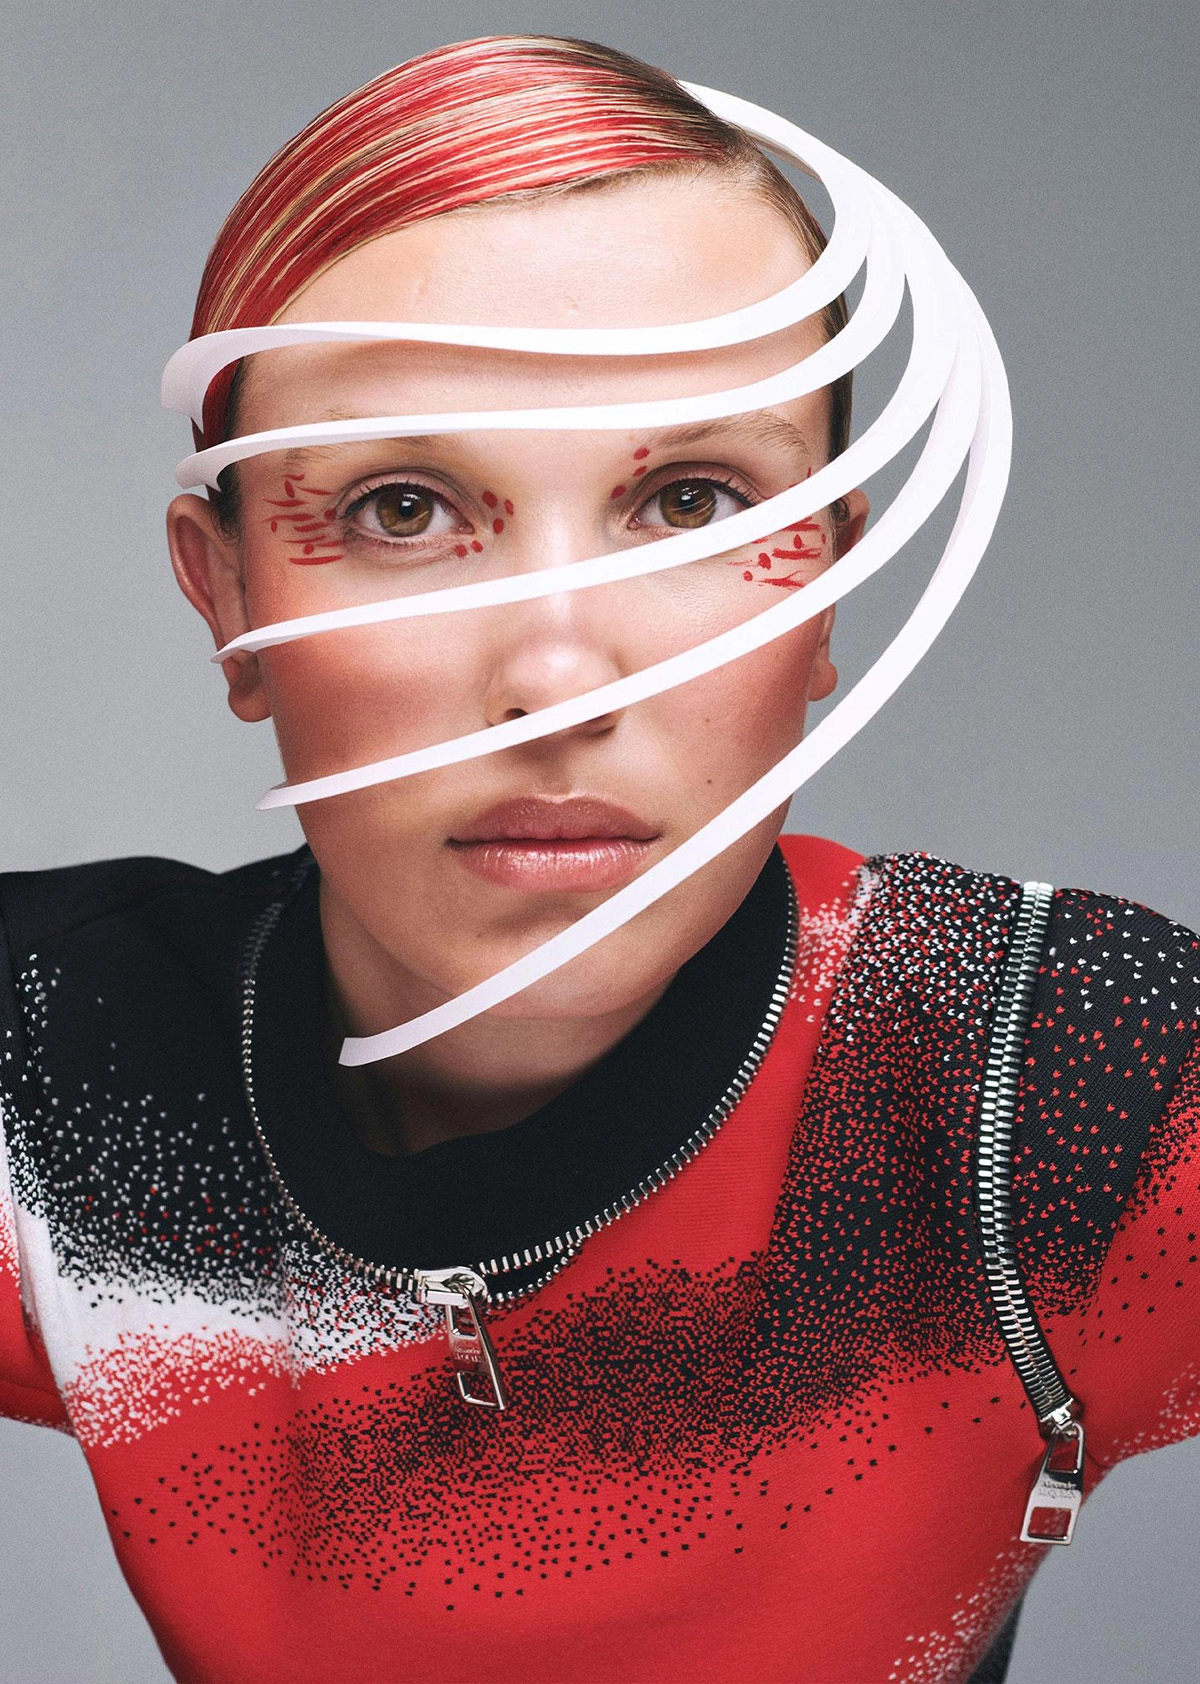 Millie Bobby Brown covers Allure US September 2022 by Jem Mitchell